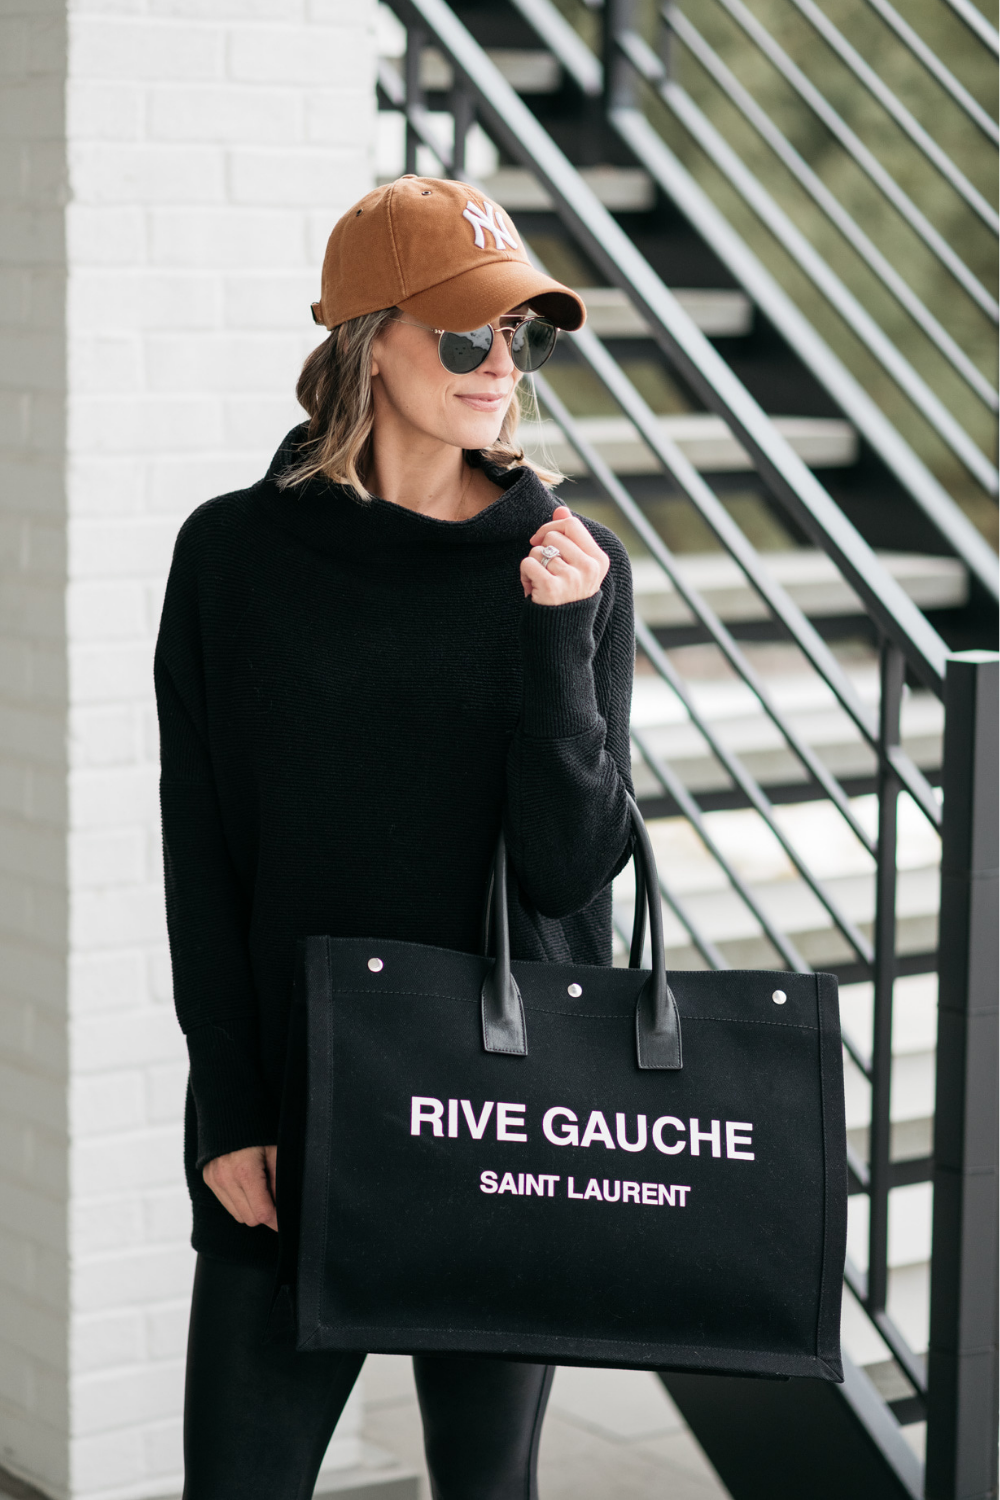 Suzanne wearing a Free People tunic and carrying a Rive Gauche tote